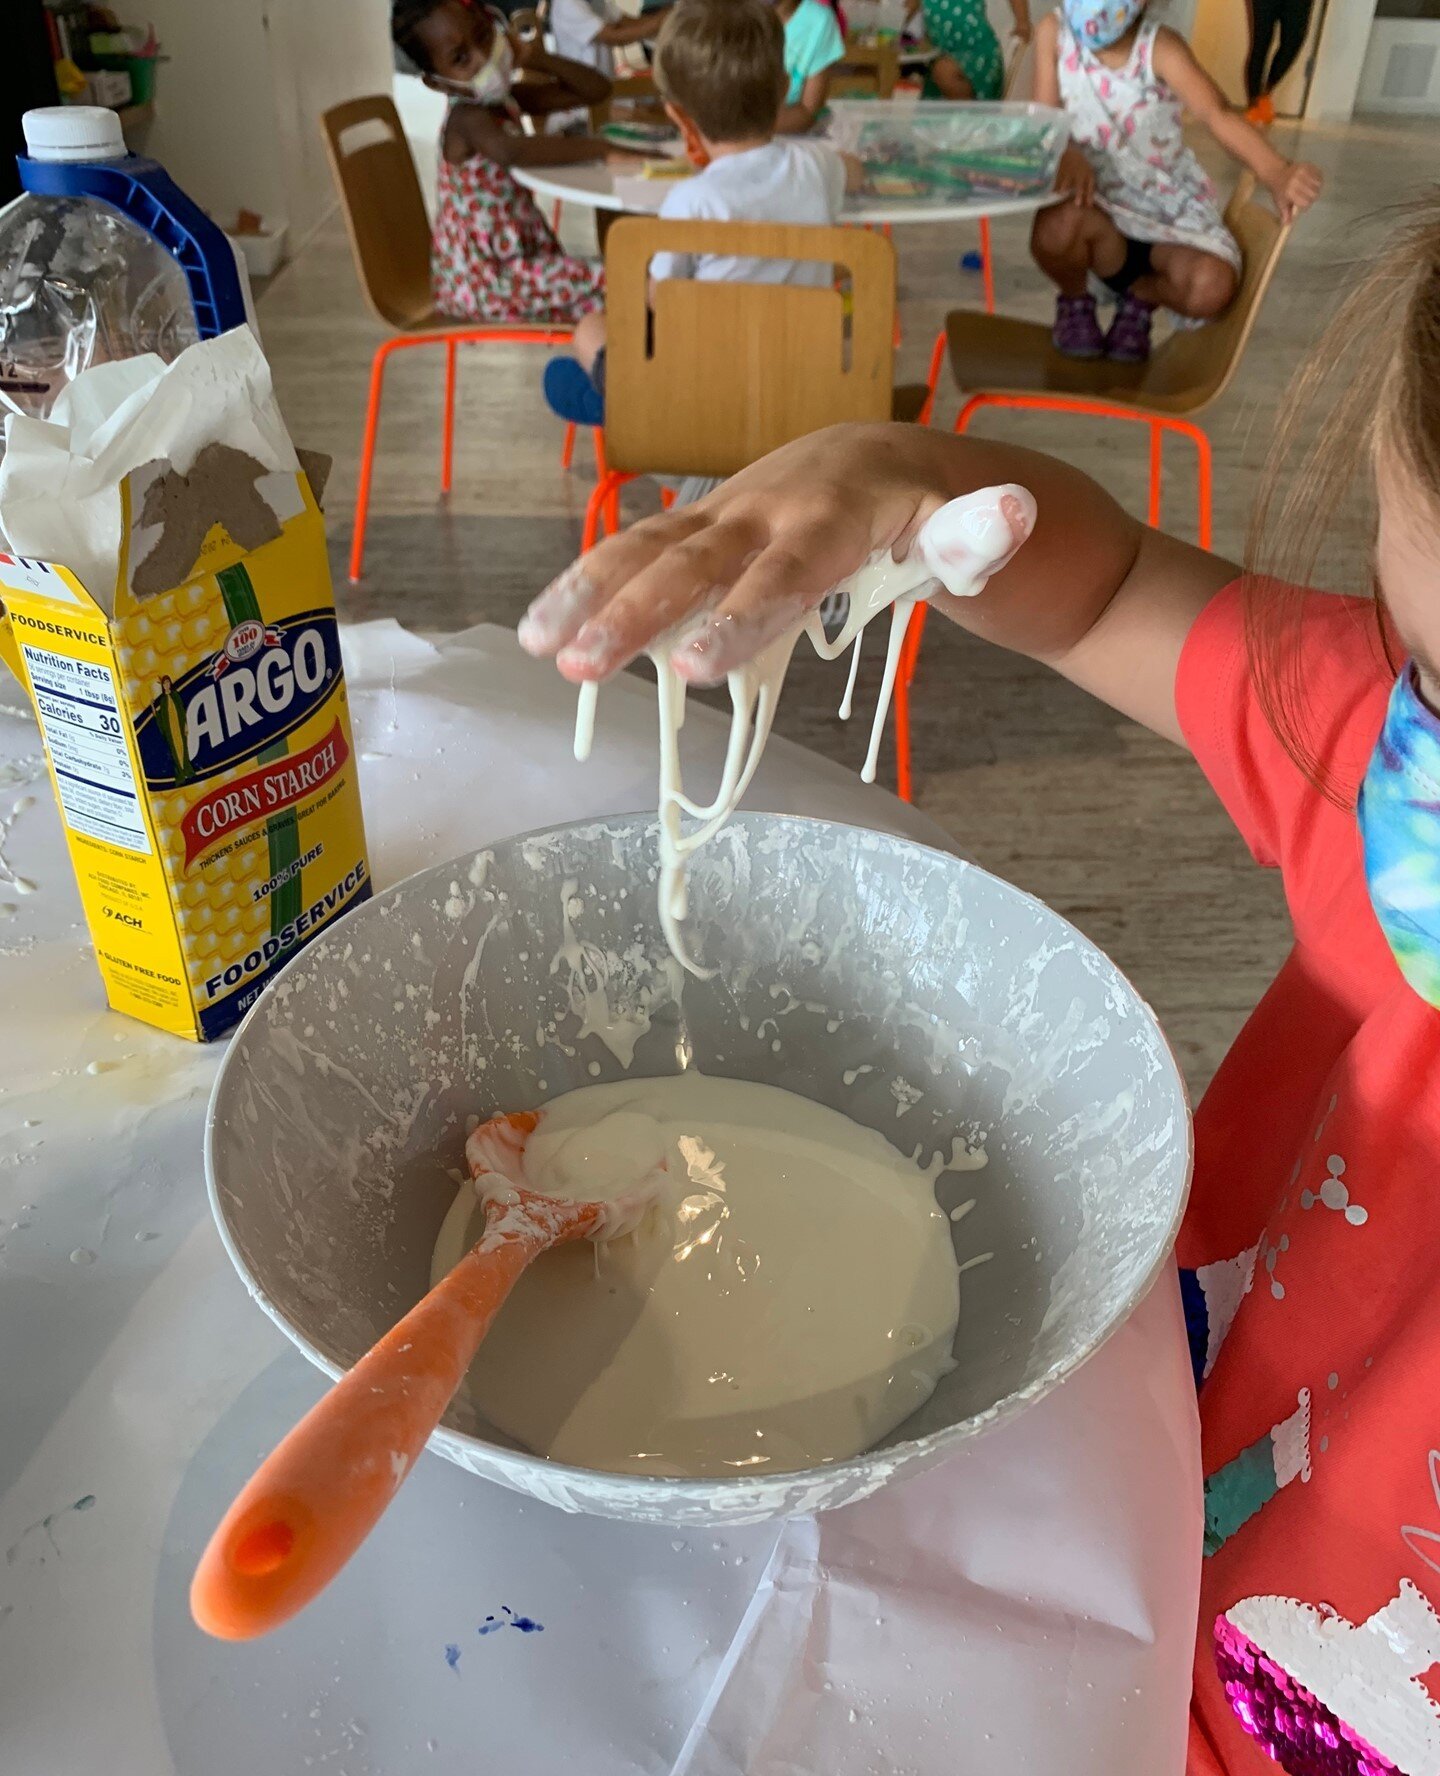 Who doesn&rsquo;t love some gooey homemade clay mix? We made this activity and once it dried the kids we're able to decorate it however they liked. This is also a really fun activity to do at home. ⁠
⁠
Get messy and have fun without looking for perfe